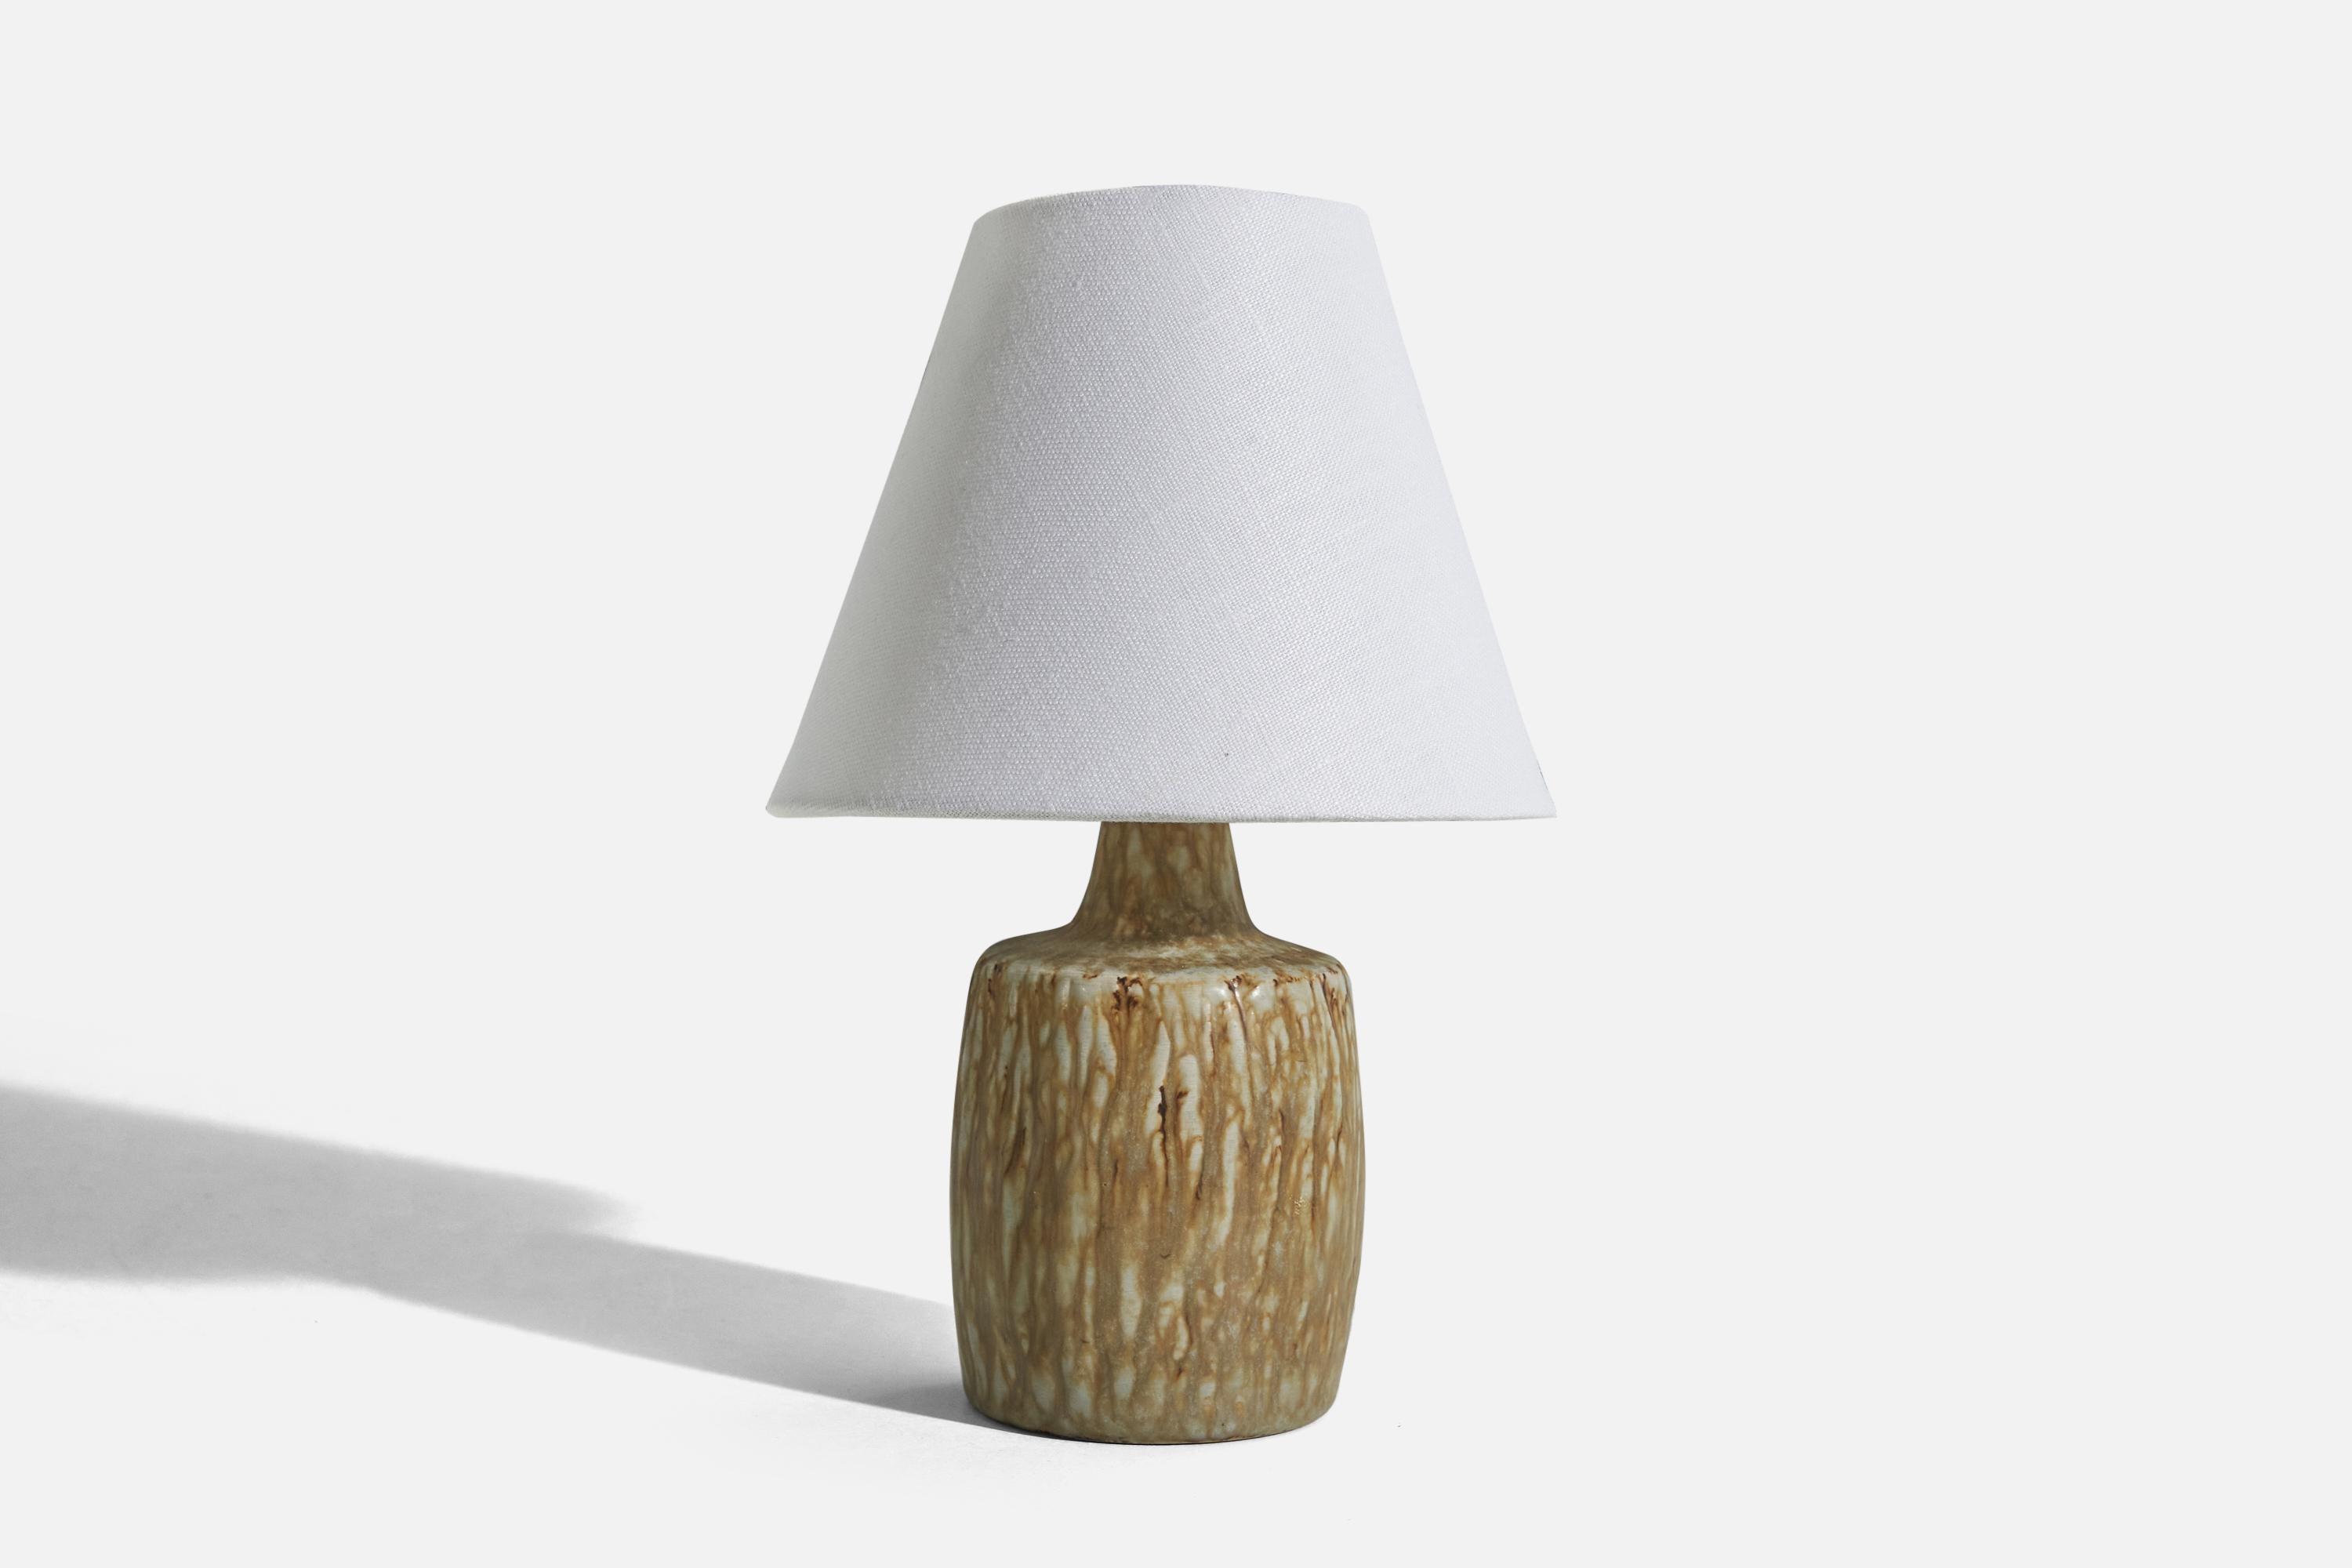 A glazed stoneware table lamp designed by Gunnar Nylund and produced by Rörstrand, Sweden, 1950s. 

Sold without lampshade. 
Dimensions of Lamp (inches) : 7.25 x 3.25 x 3.25 (H x W x D)
Dimensions of Shade (inches) : 3 x 6 x 5 (T x B x